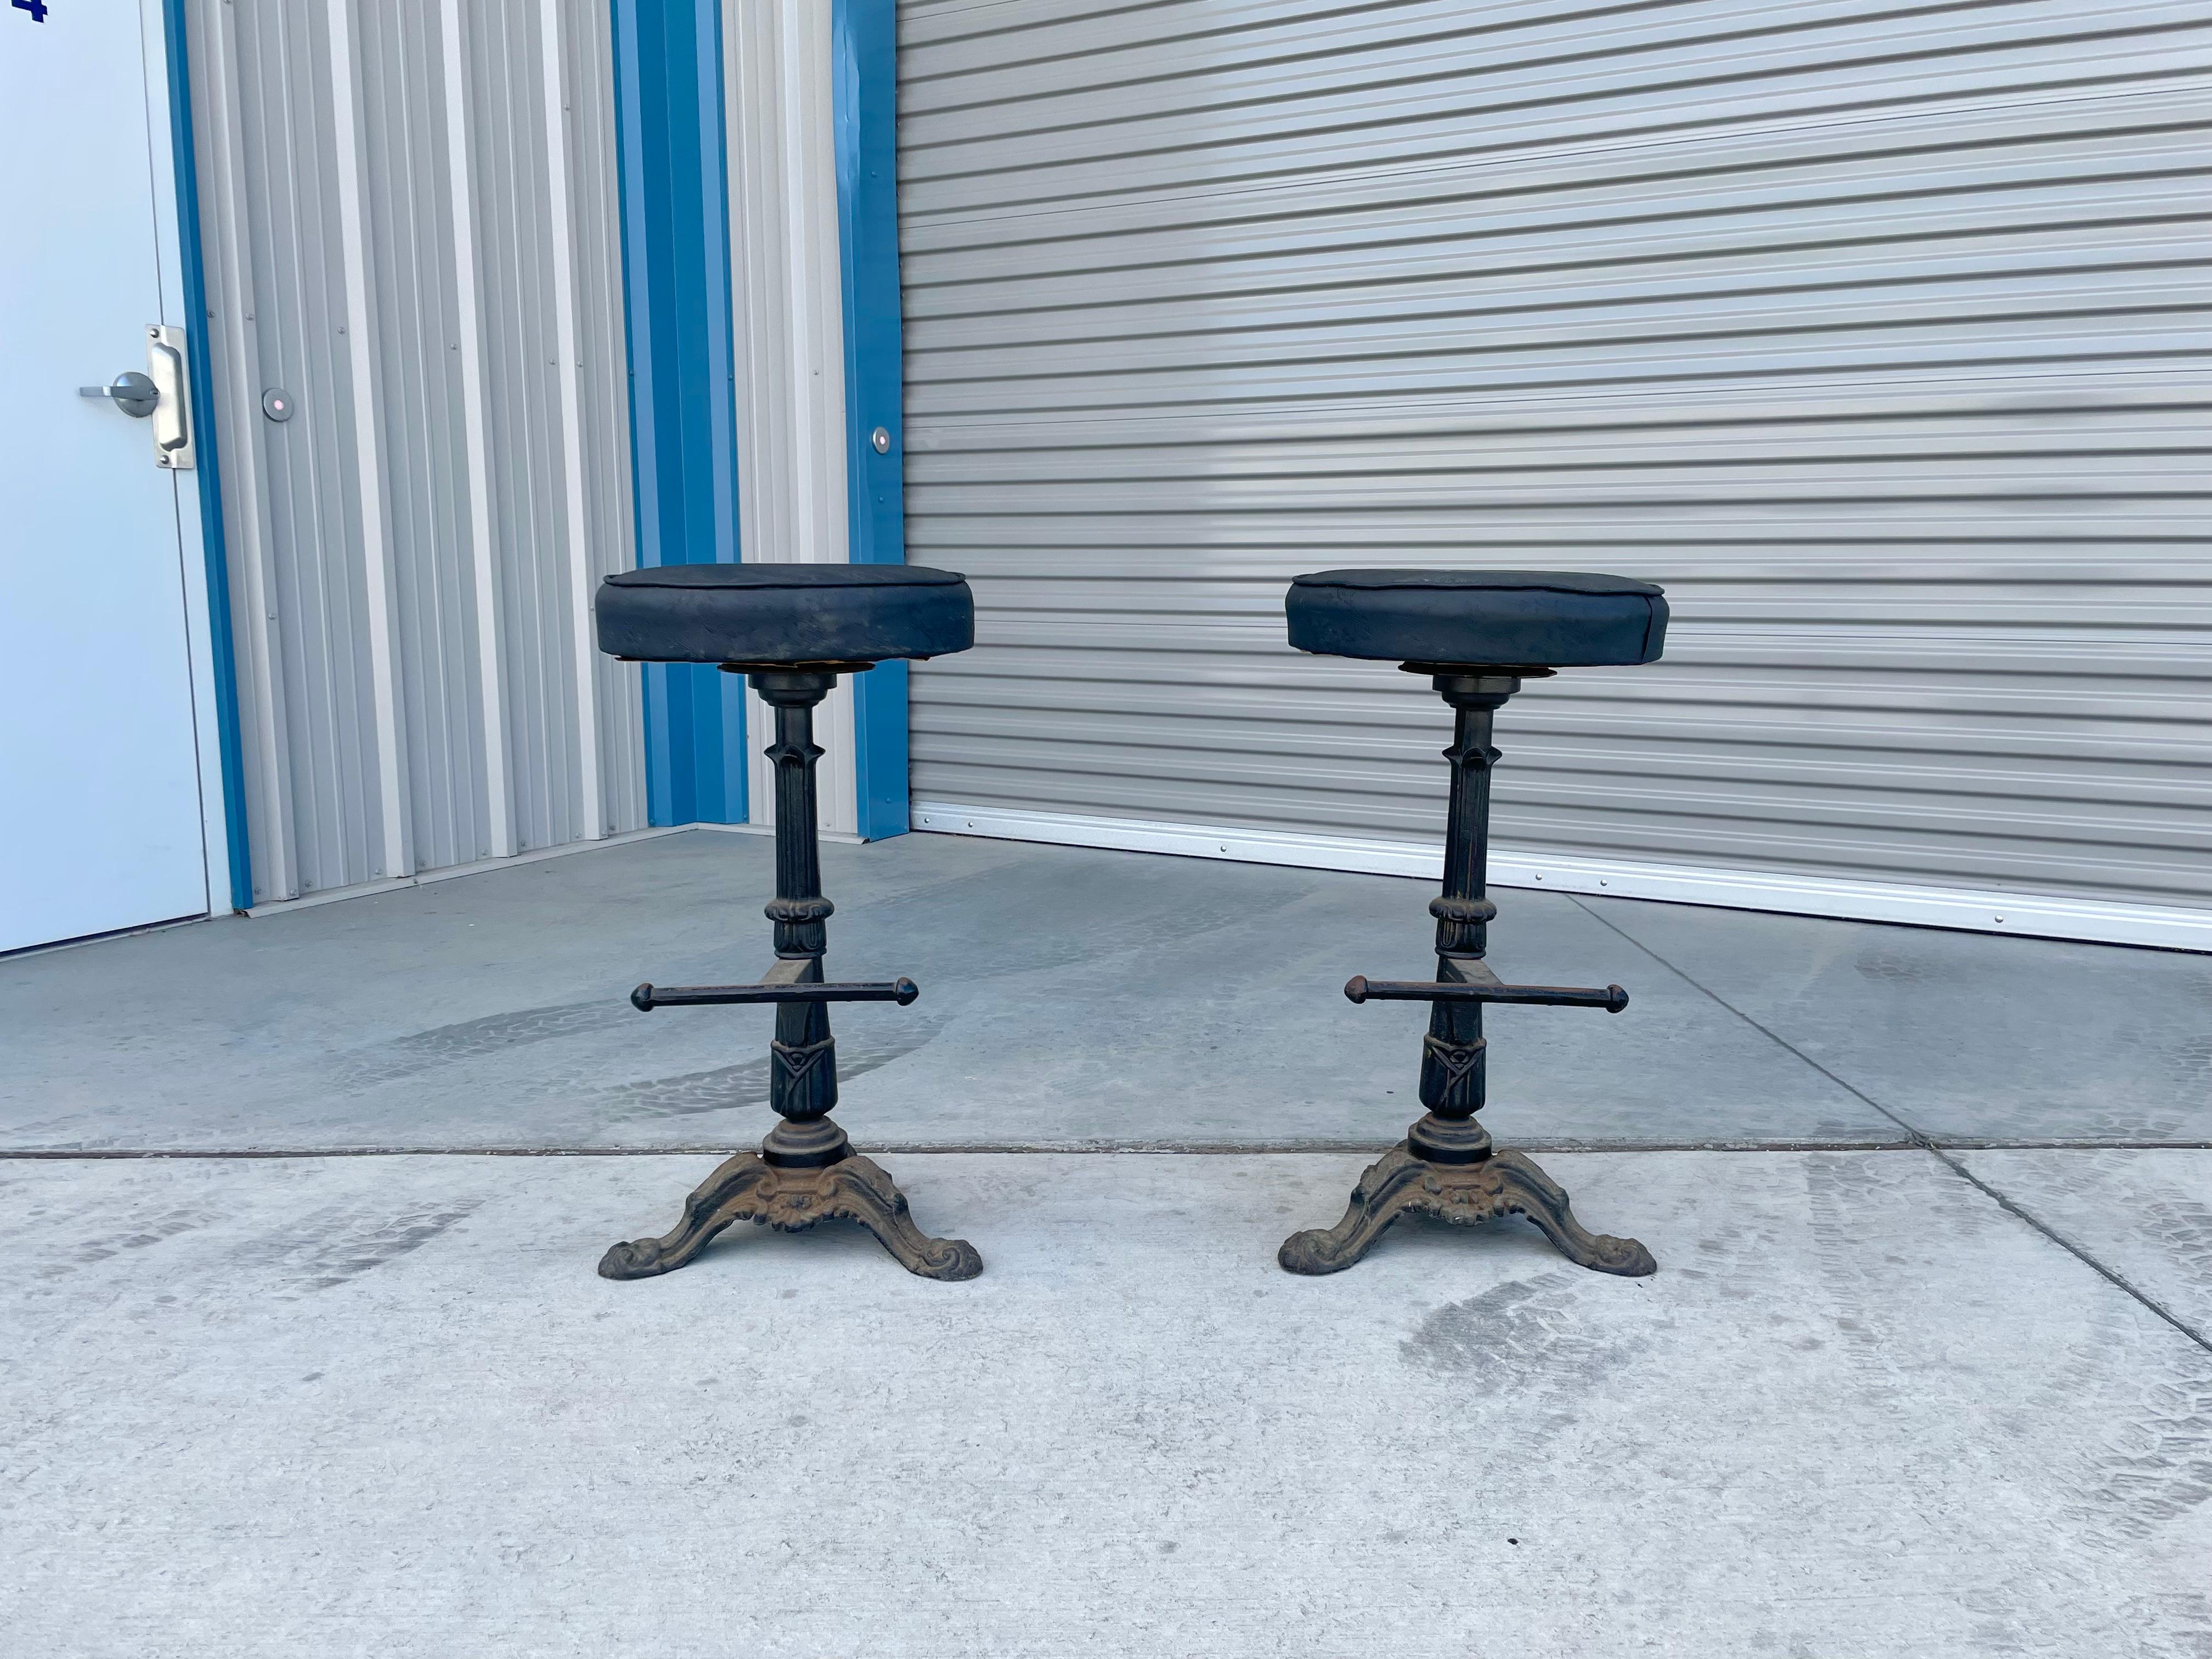 Vintage cast iron swivel bar stools were designed and manufactured in the United States during the 1900s. The stools are absolutely gorgeous, featuring a sturdy iron frame that exudes a timeless charm. What's more, they are incredibly comfortable to